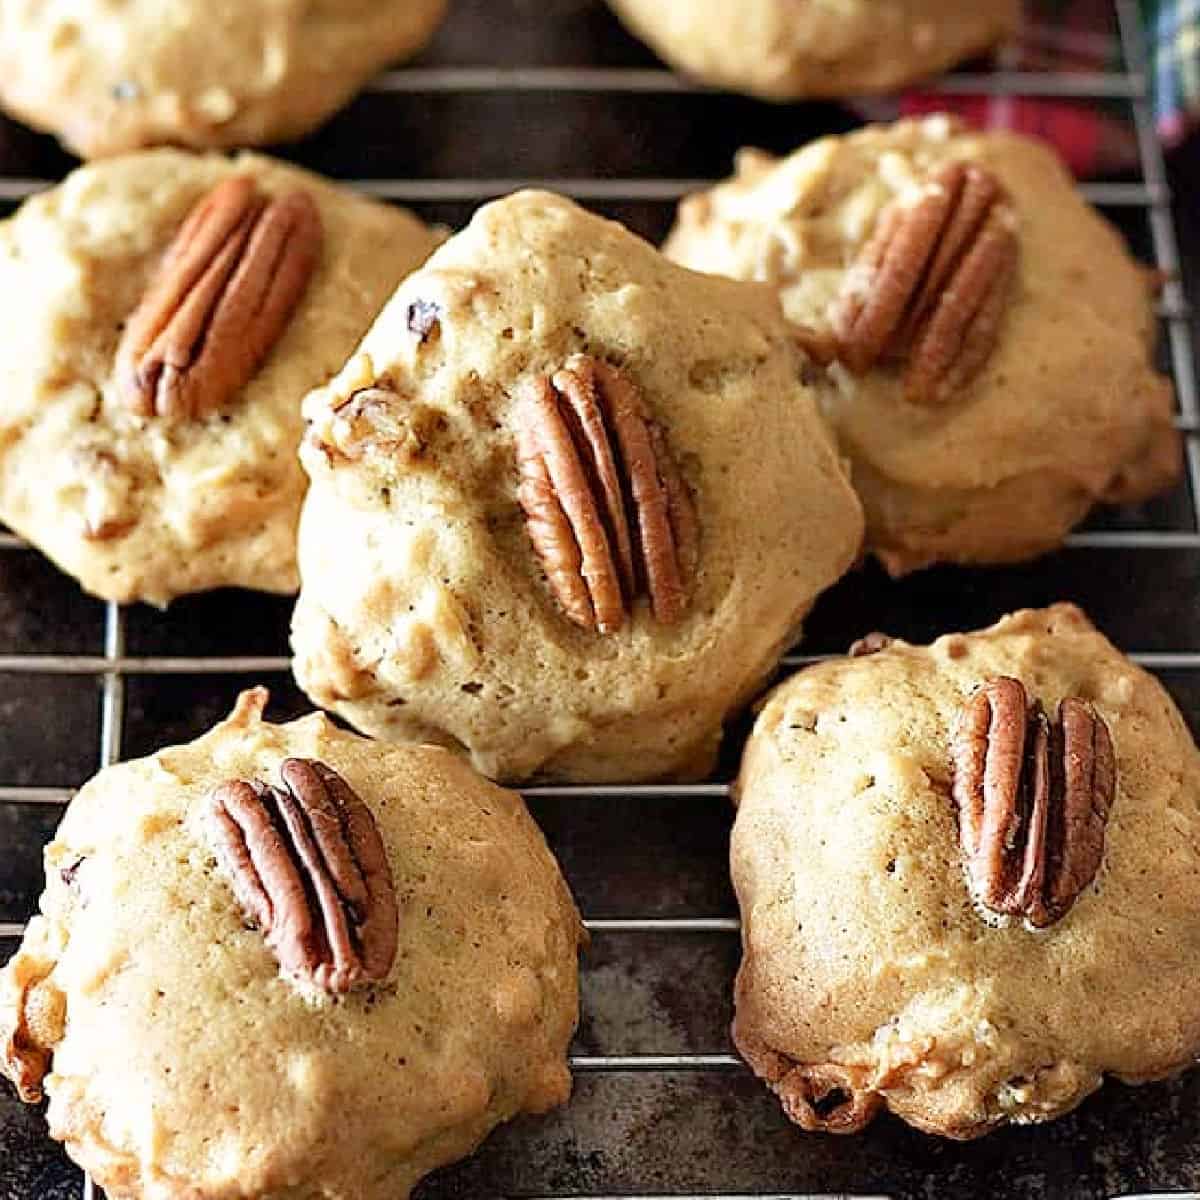 These pecan cookies are ready in 30 minutes and are flavored with coconut and pecan pieces. It's a family favorite and everyone loves it!
